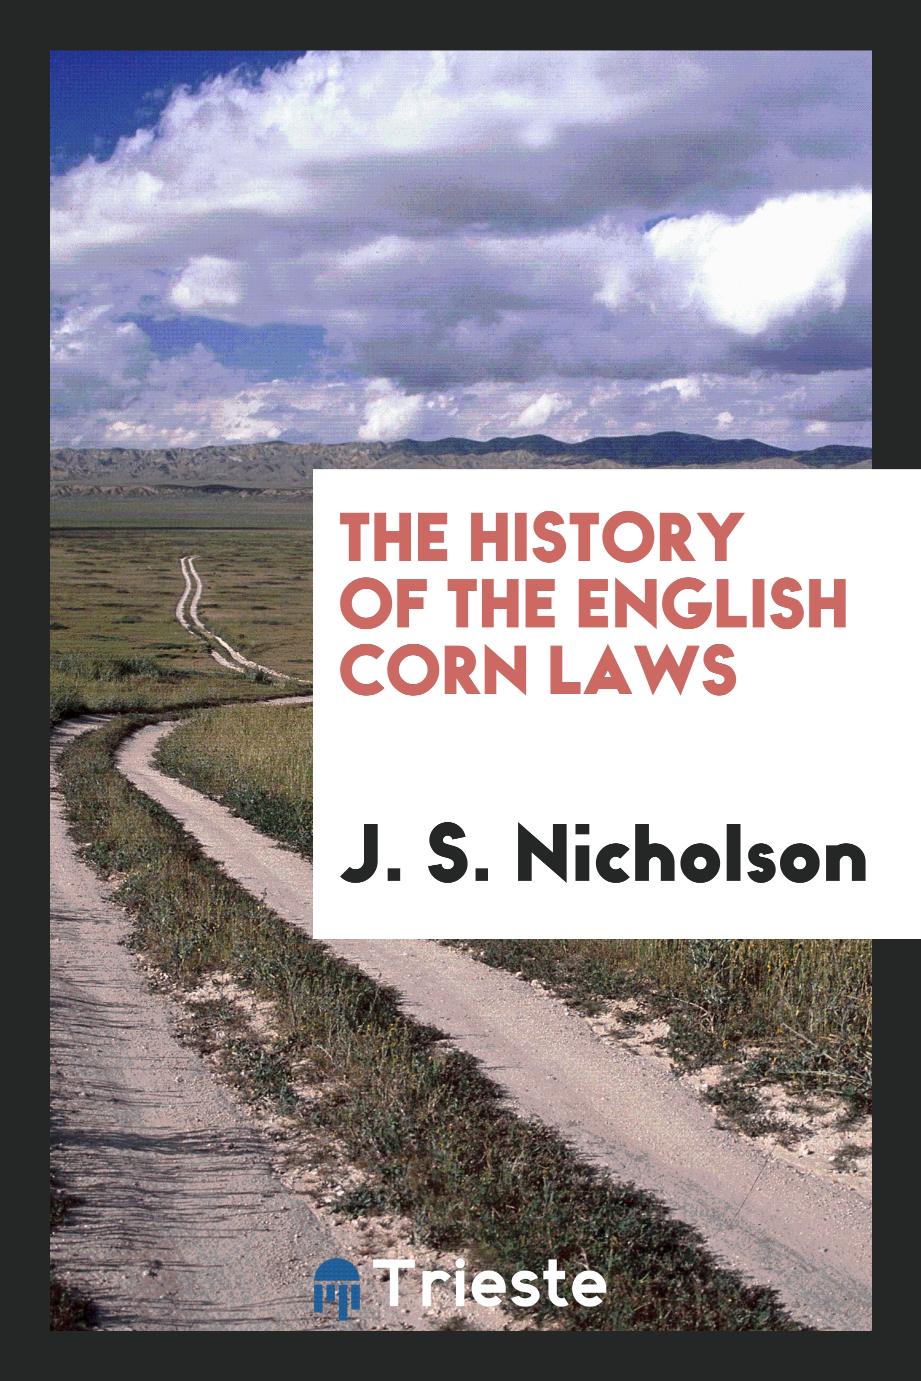 The history of the English corn laws